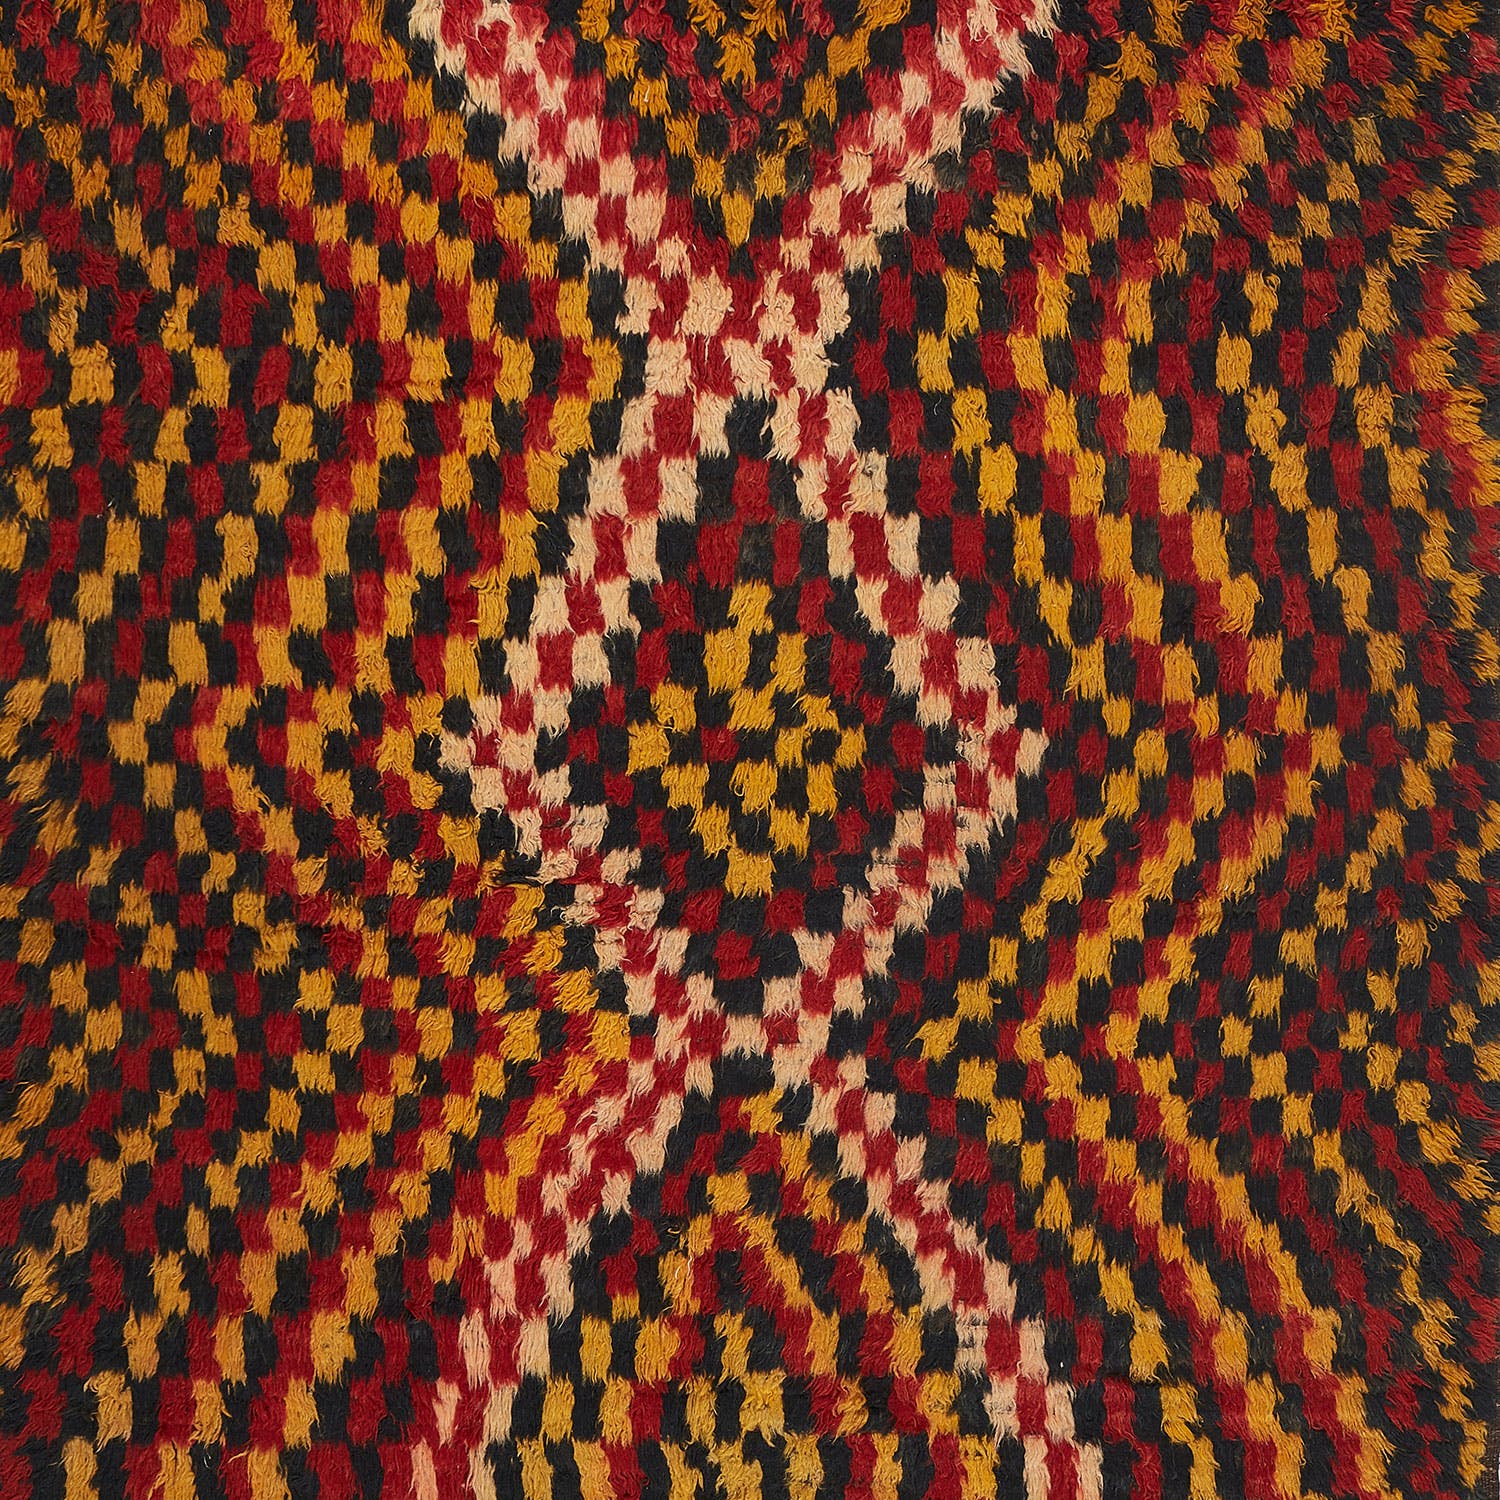 Close-up of vibrant, symmetrical fabric pattern with intricate geometric design.